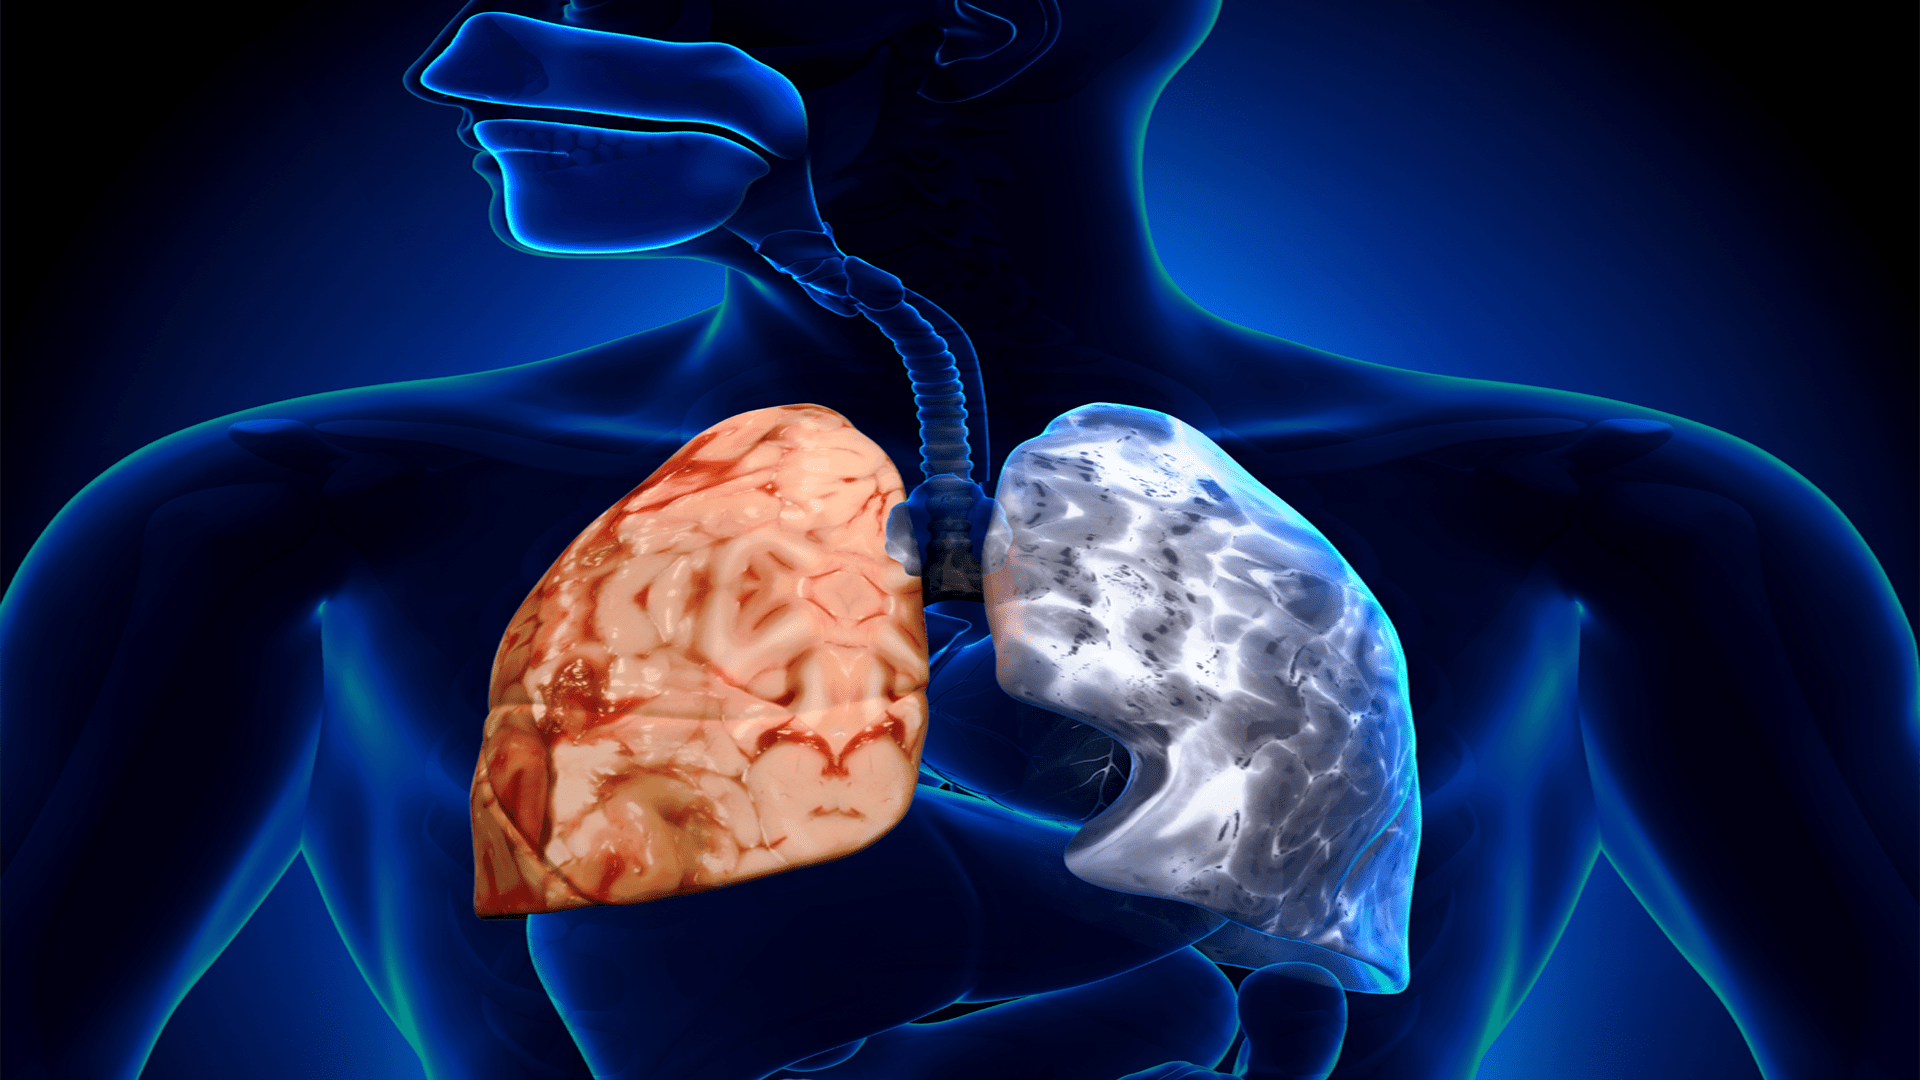 Don’t Let COPD Flare-Ups Control You: Causes, Symptoms, and Management Strategies